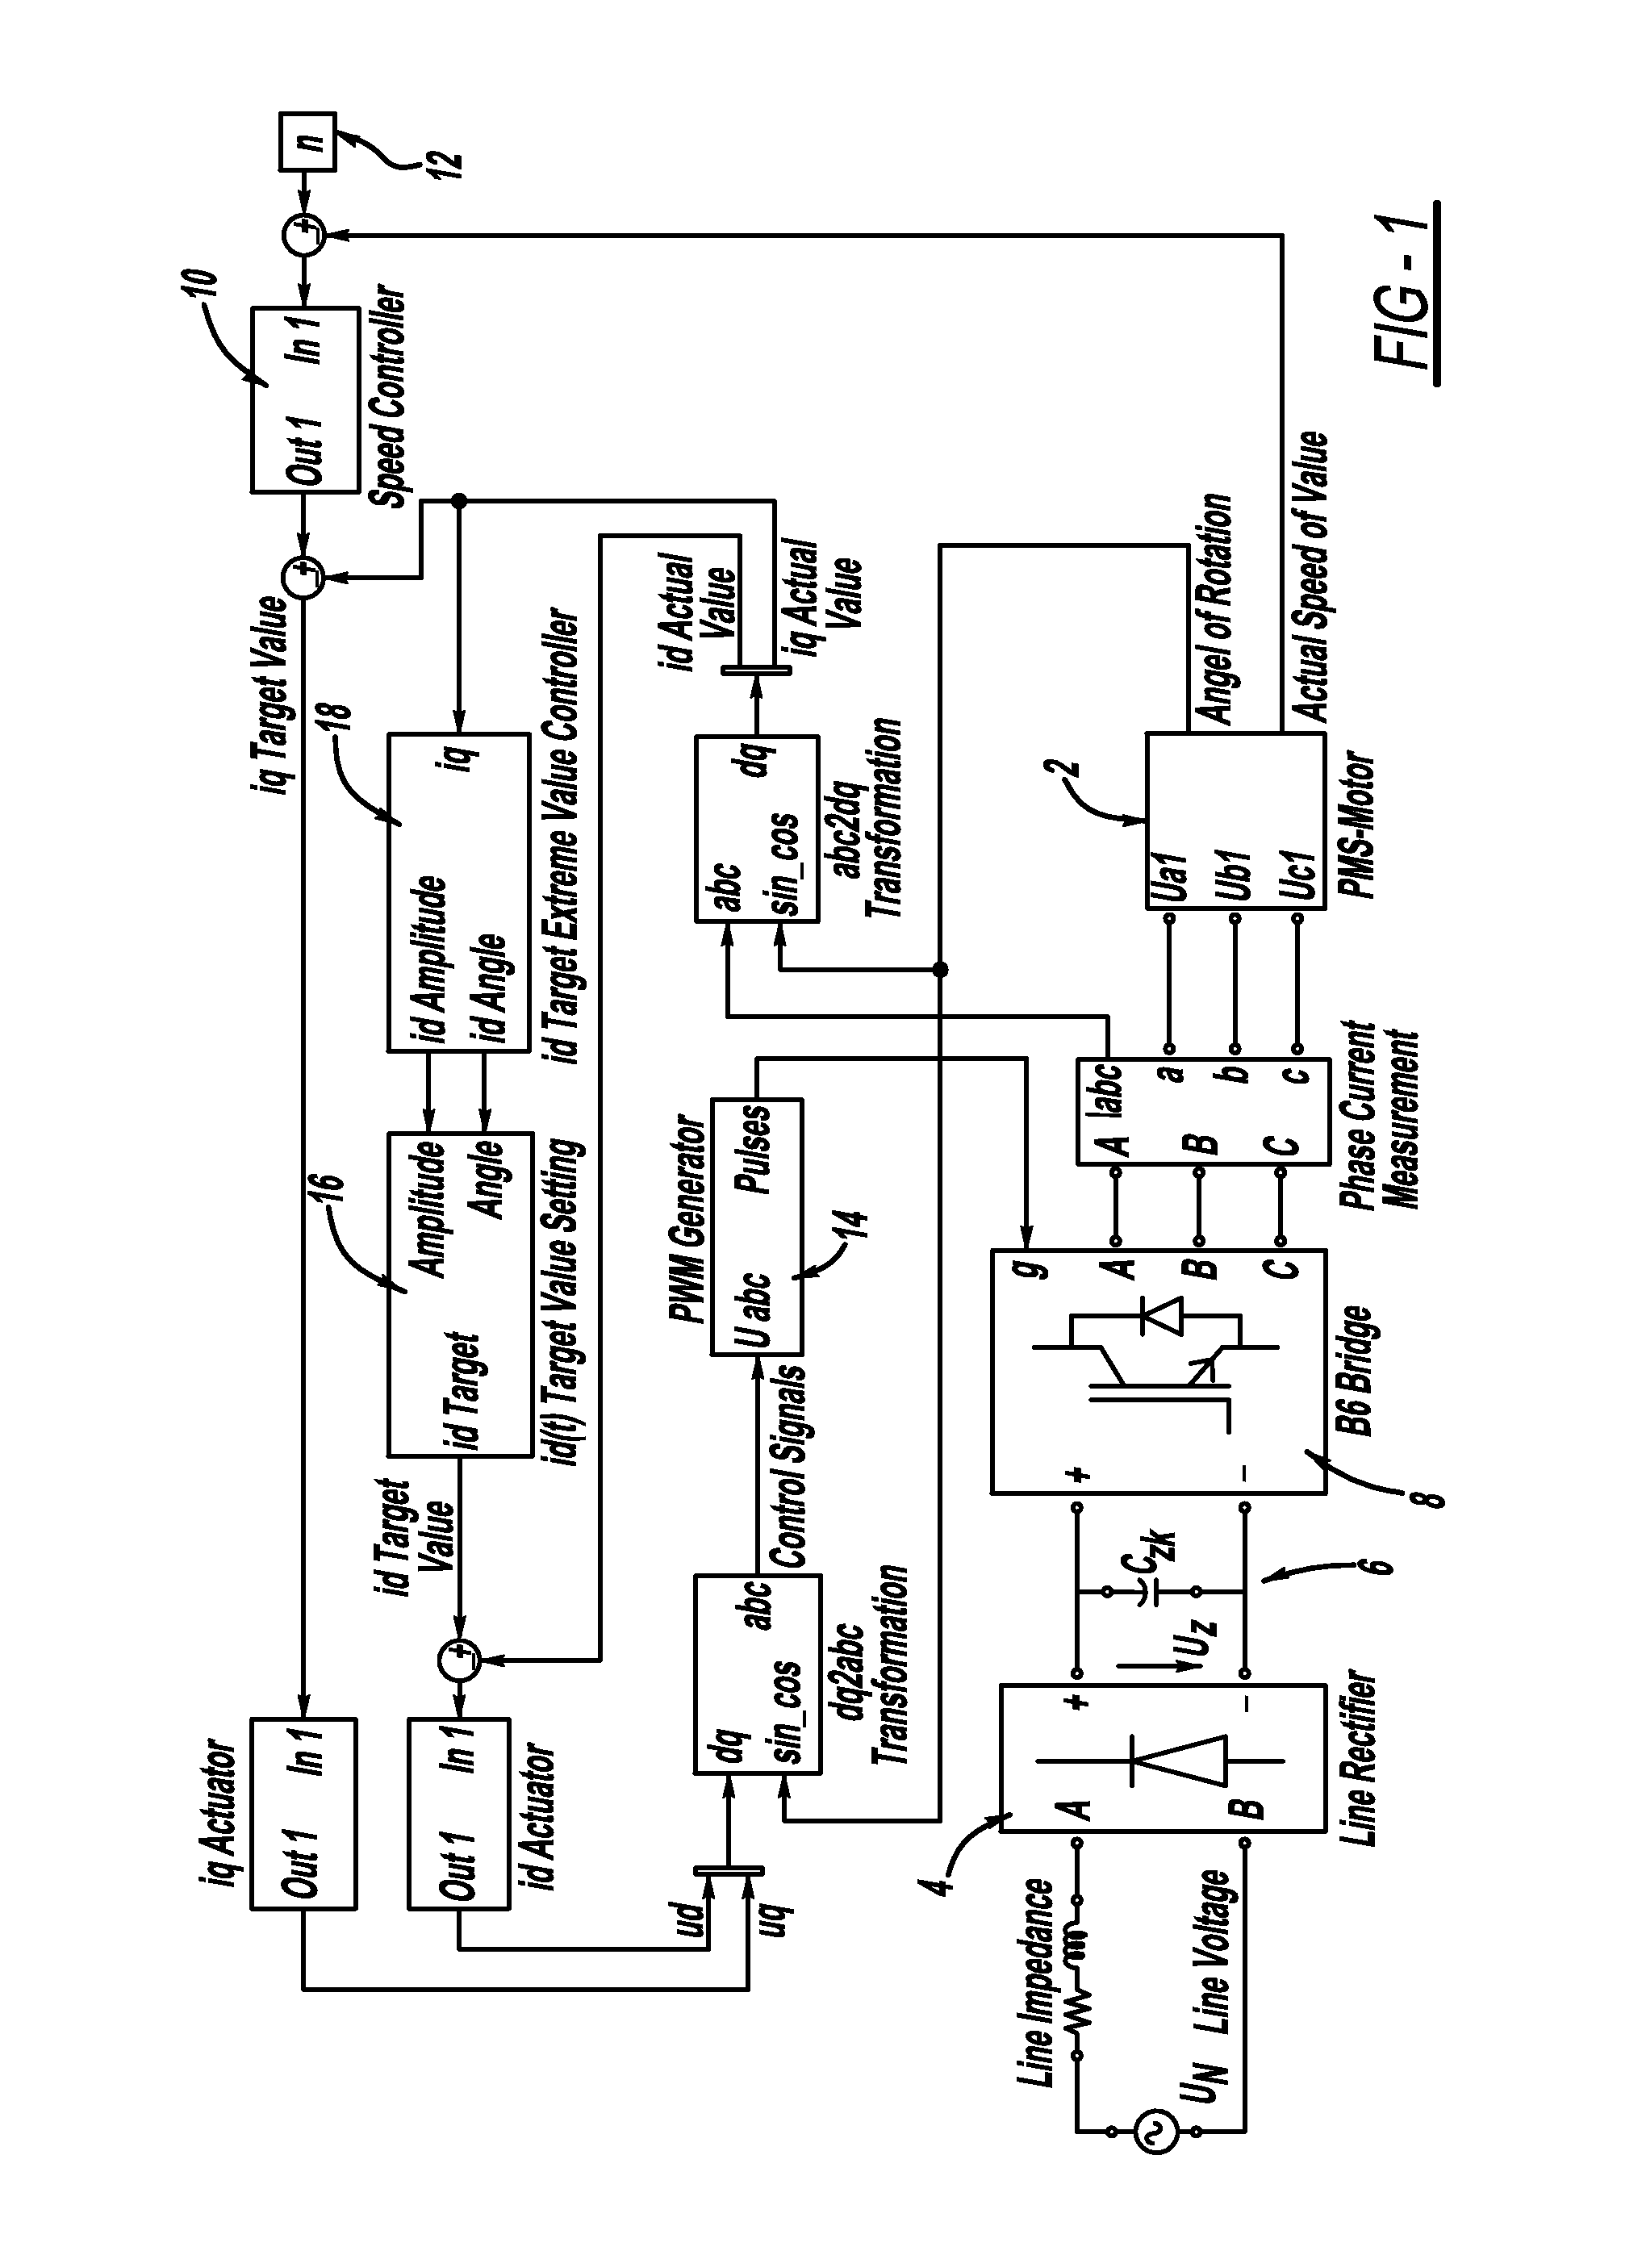 Method and Control System for Controlling a Brushless Electric Motor